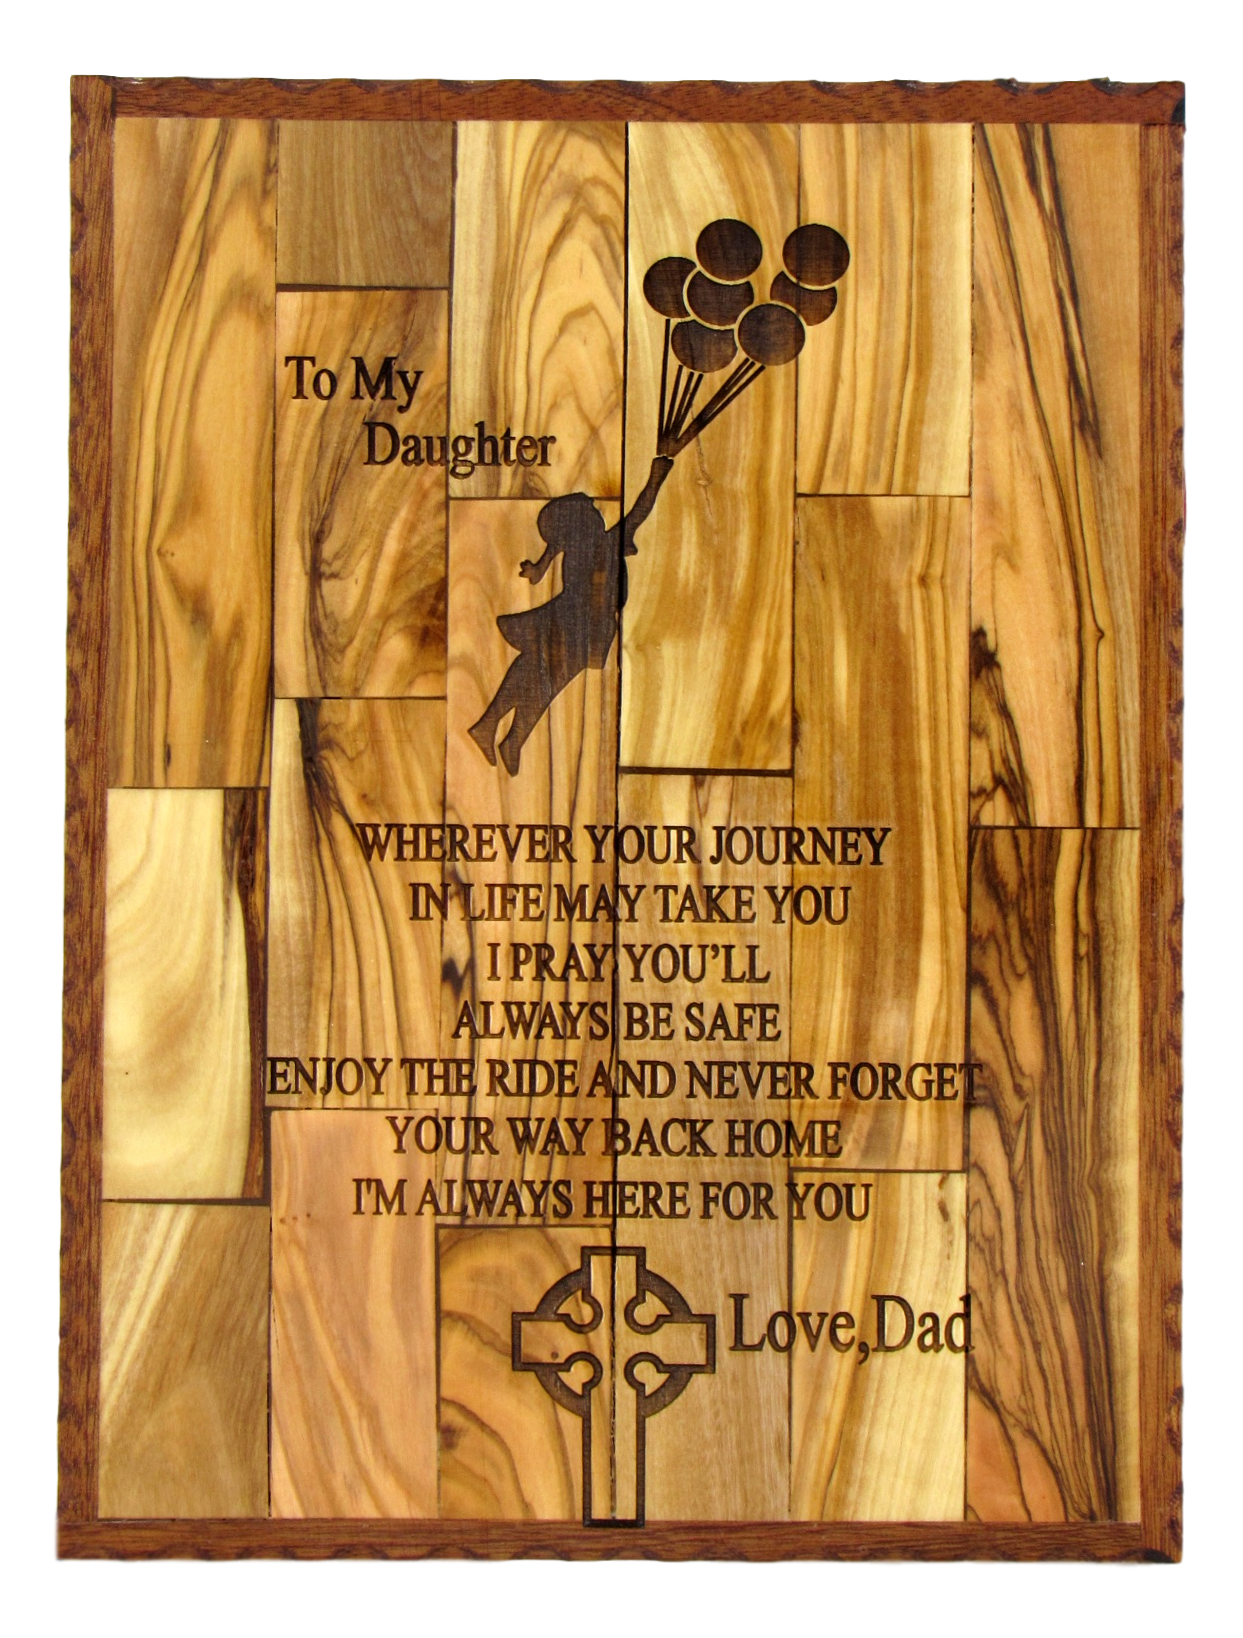 Plaque, "To My Daughter" & "To My Son" Messages